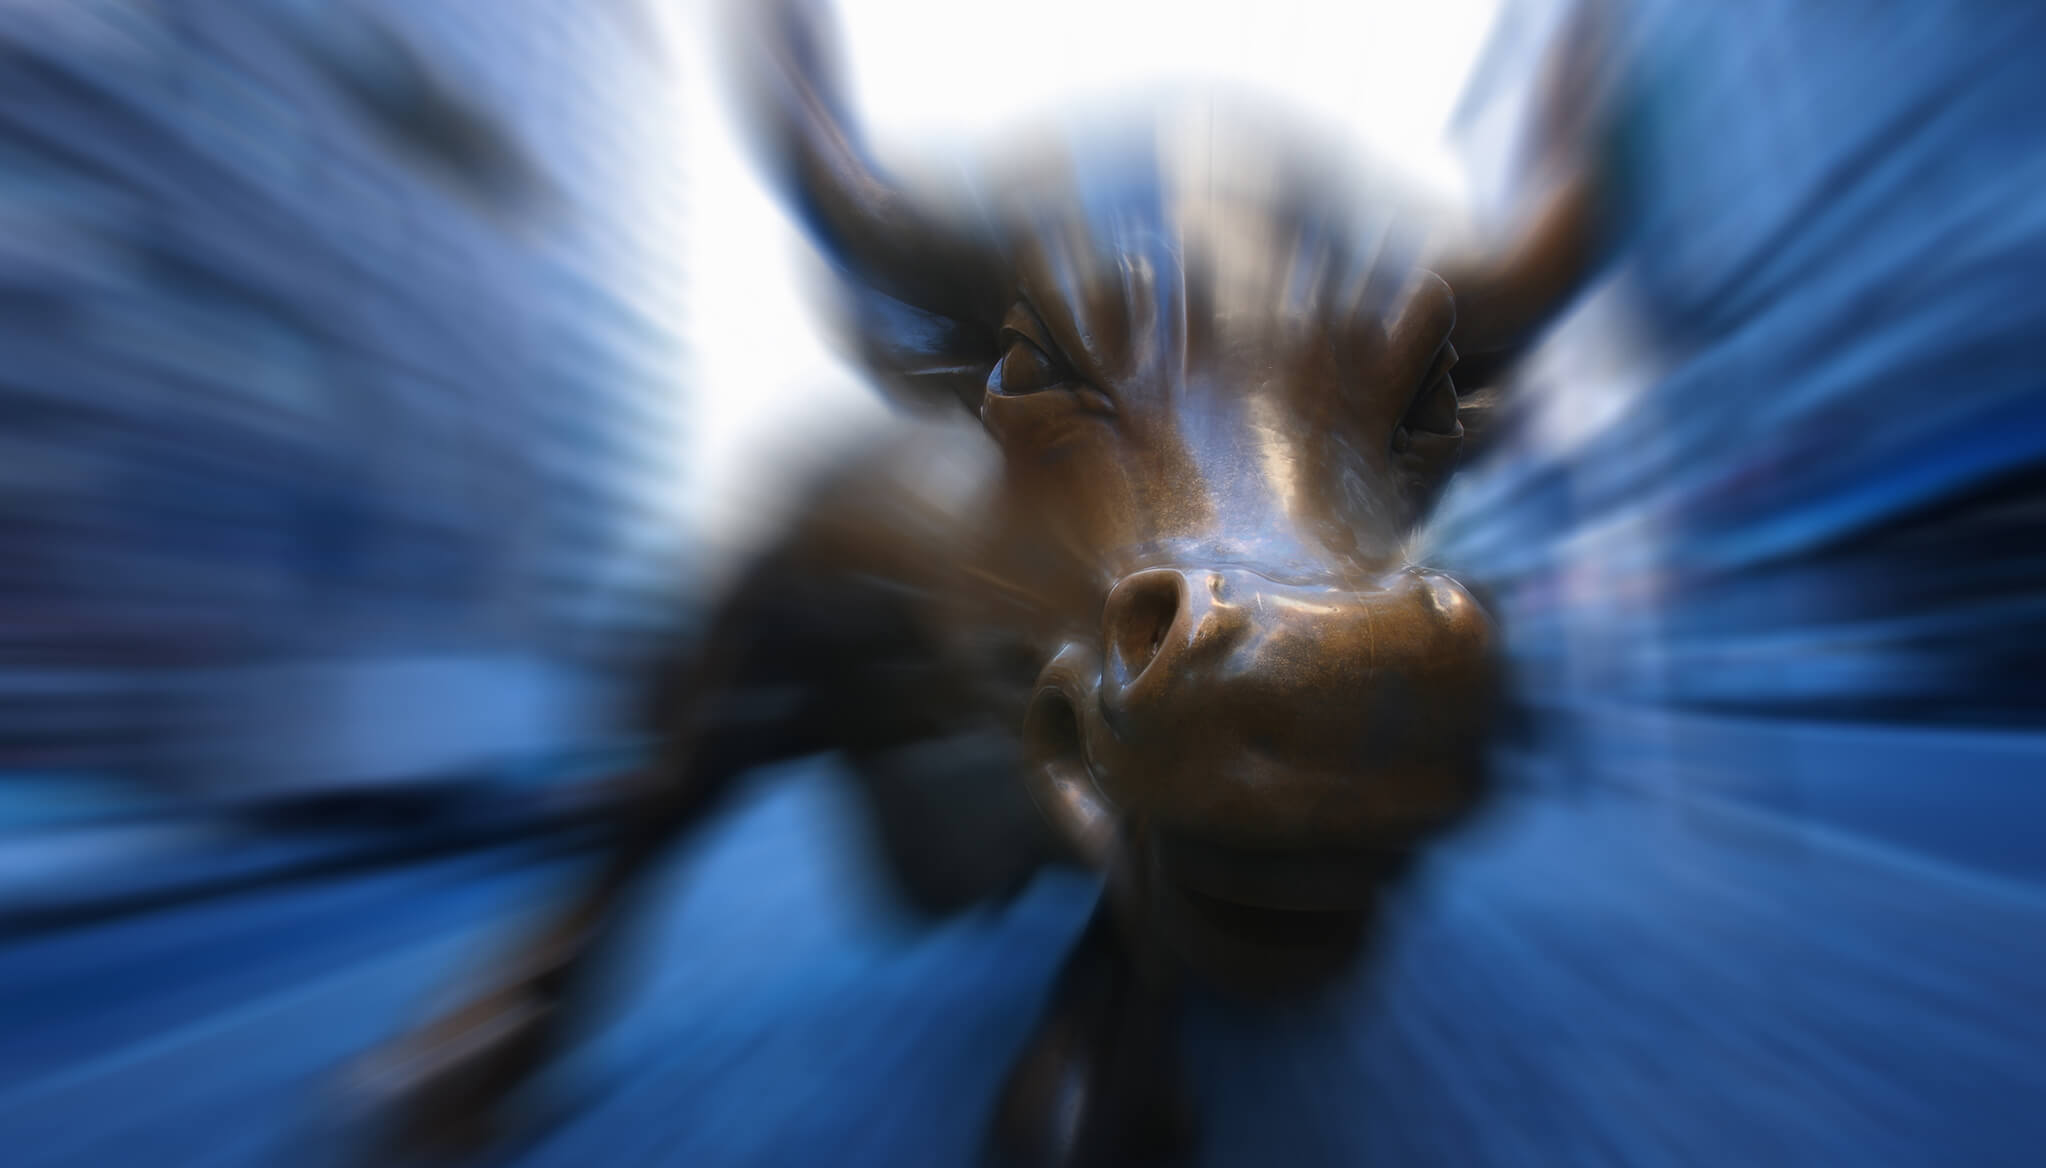 Wall Street bull statue with motion blur